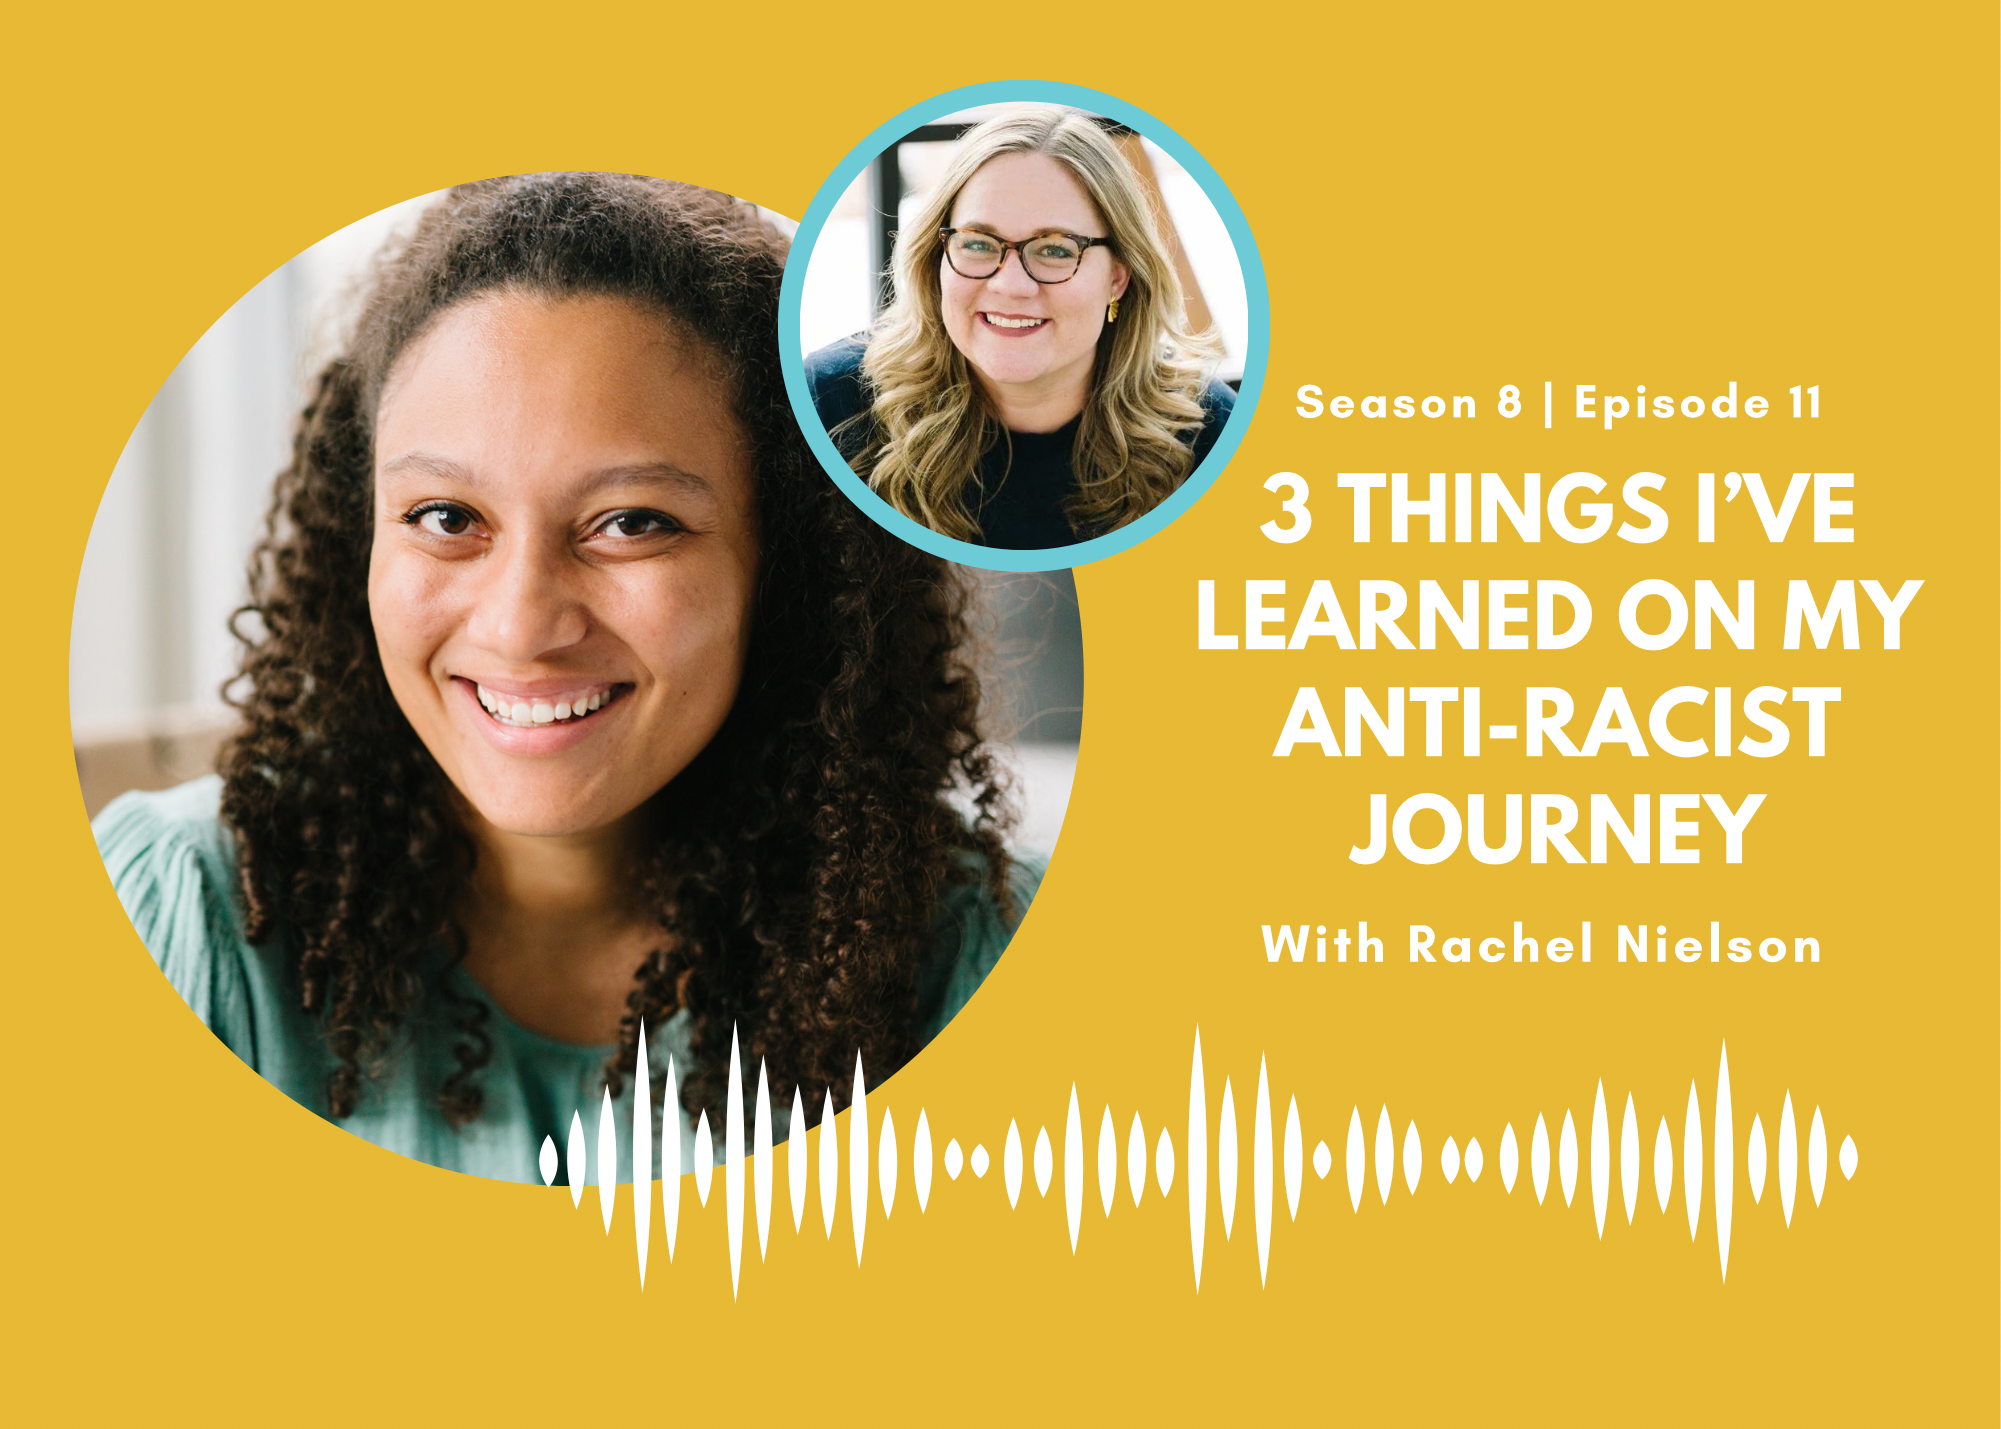 3 Things I’ve Learned On My Anti-Racist Journey